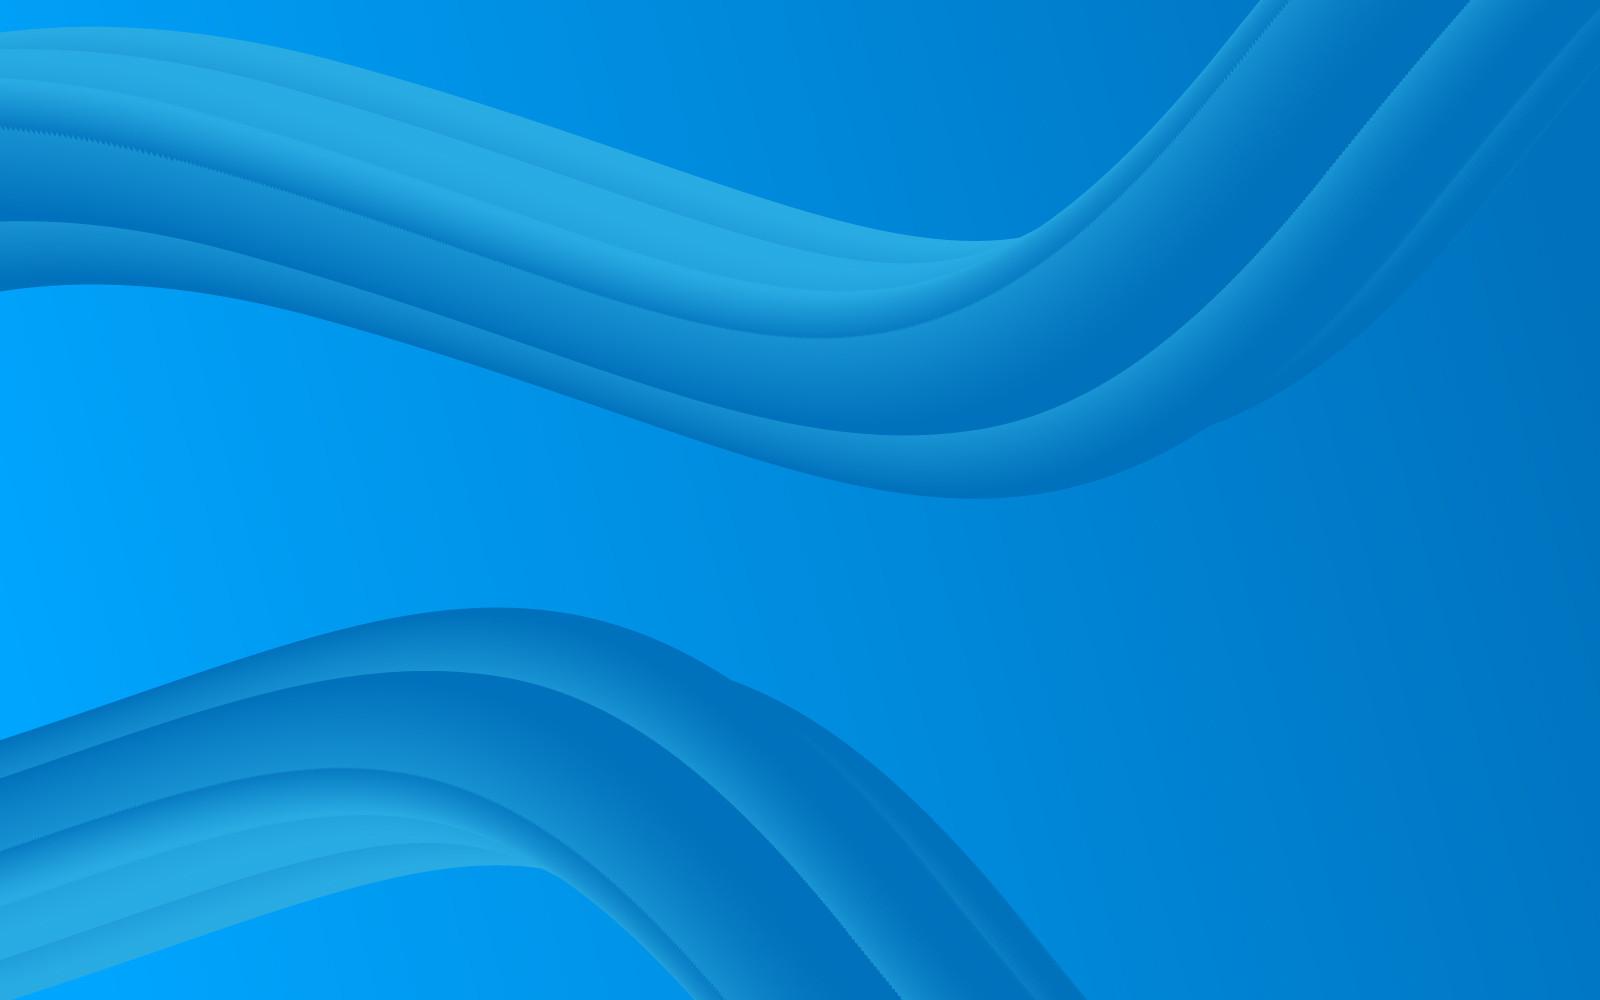 Abstract Stylish Blue Gradient Template